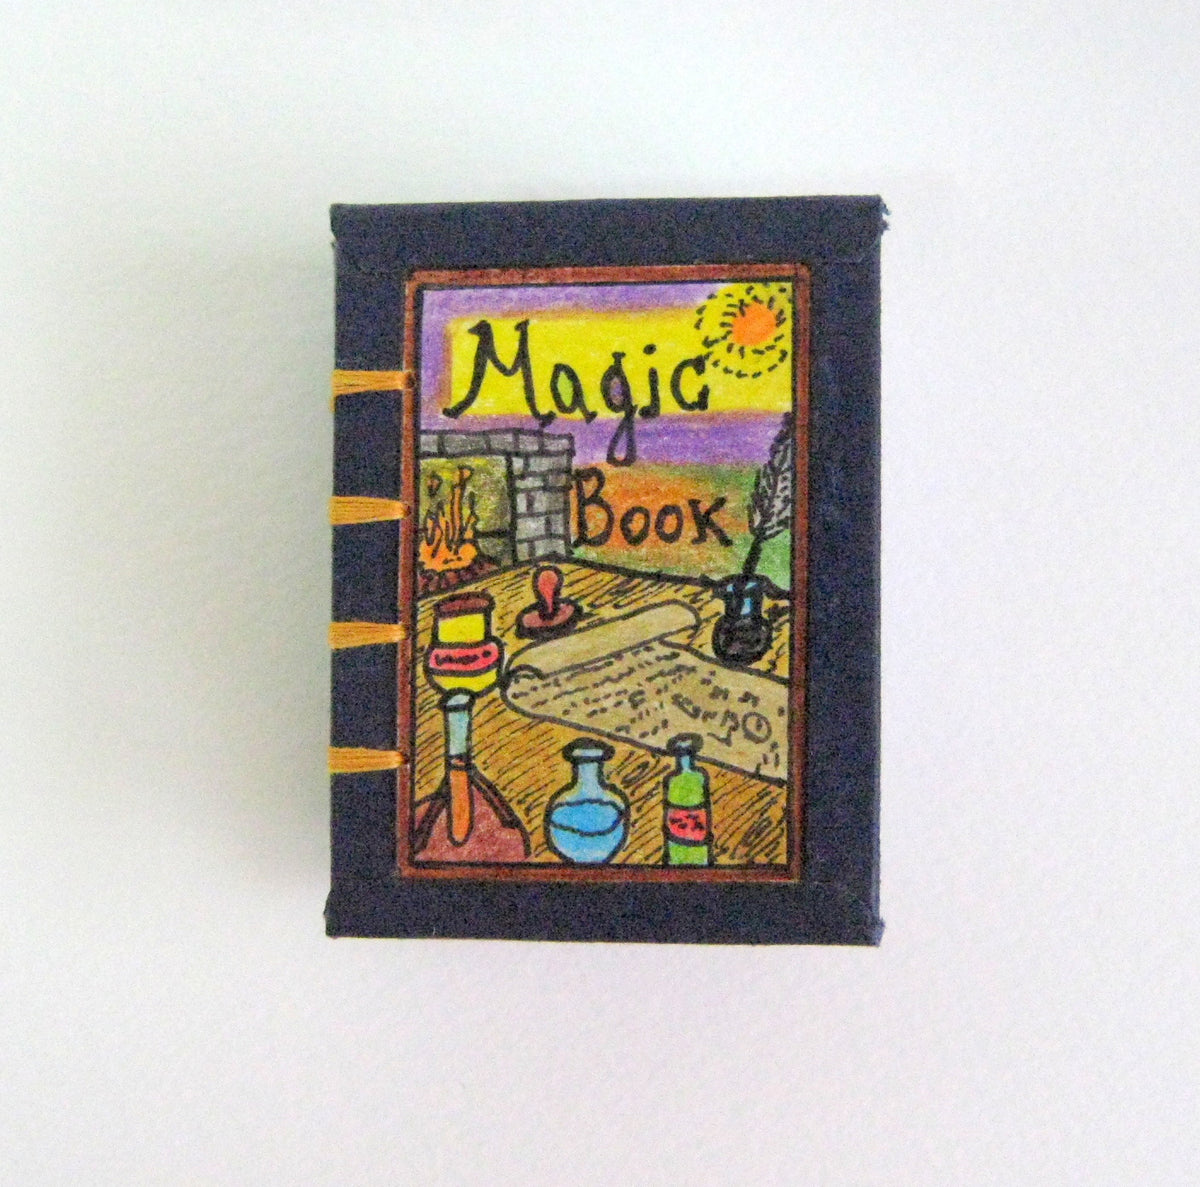 Witchcraft Mini book Art coptic journal Magic Book for fantasy and epic movie fans and gamers, Gift ideas for game fans, mini travel journal- whith hand-drawn arts on the cover